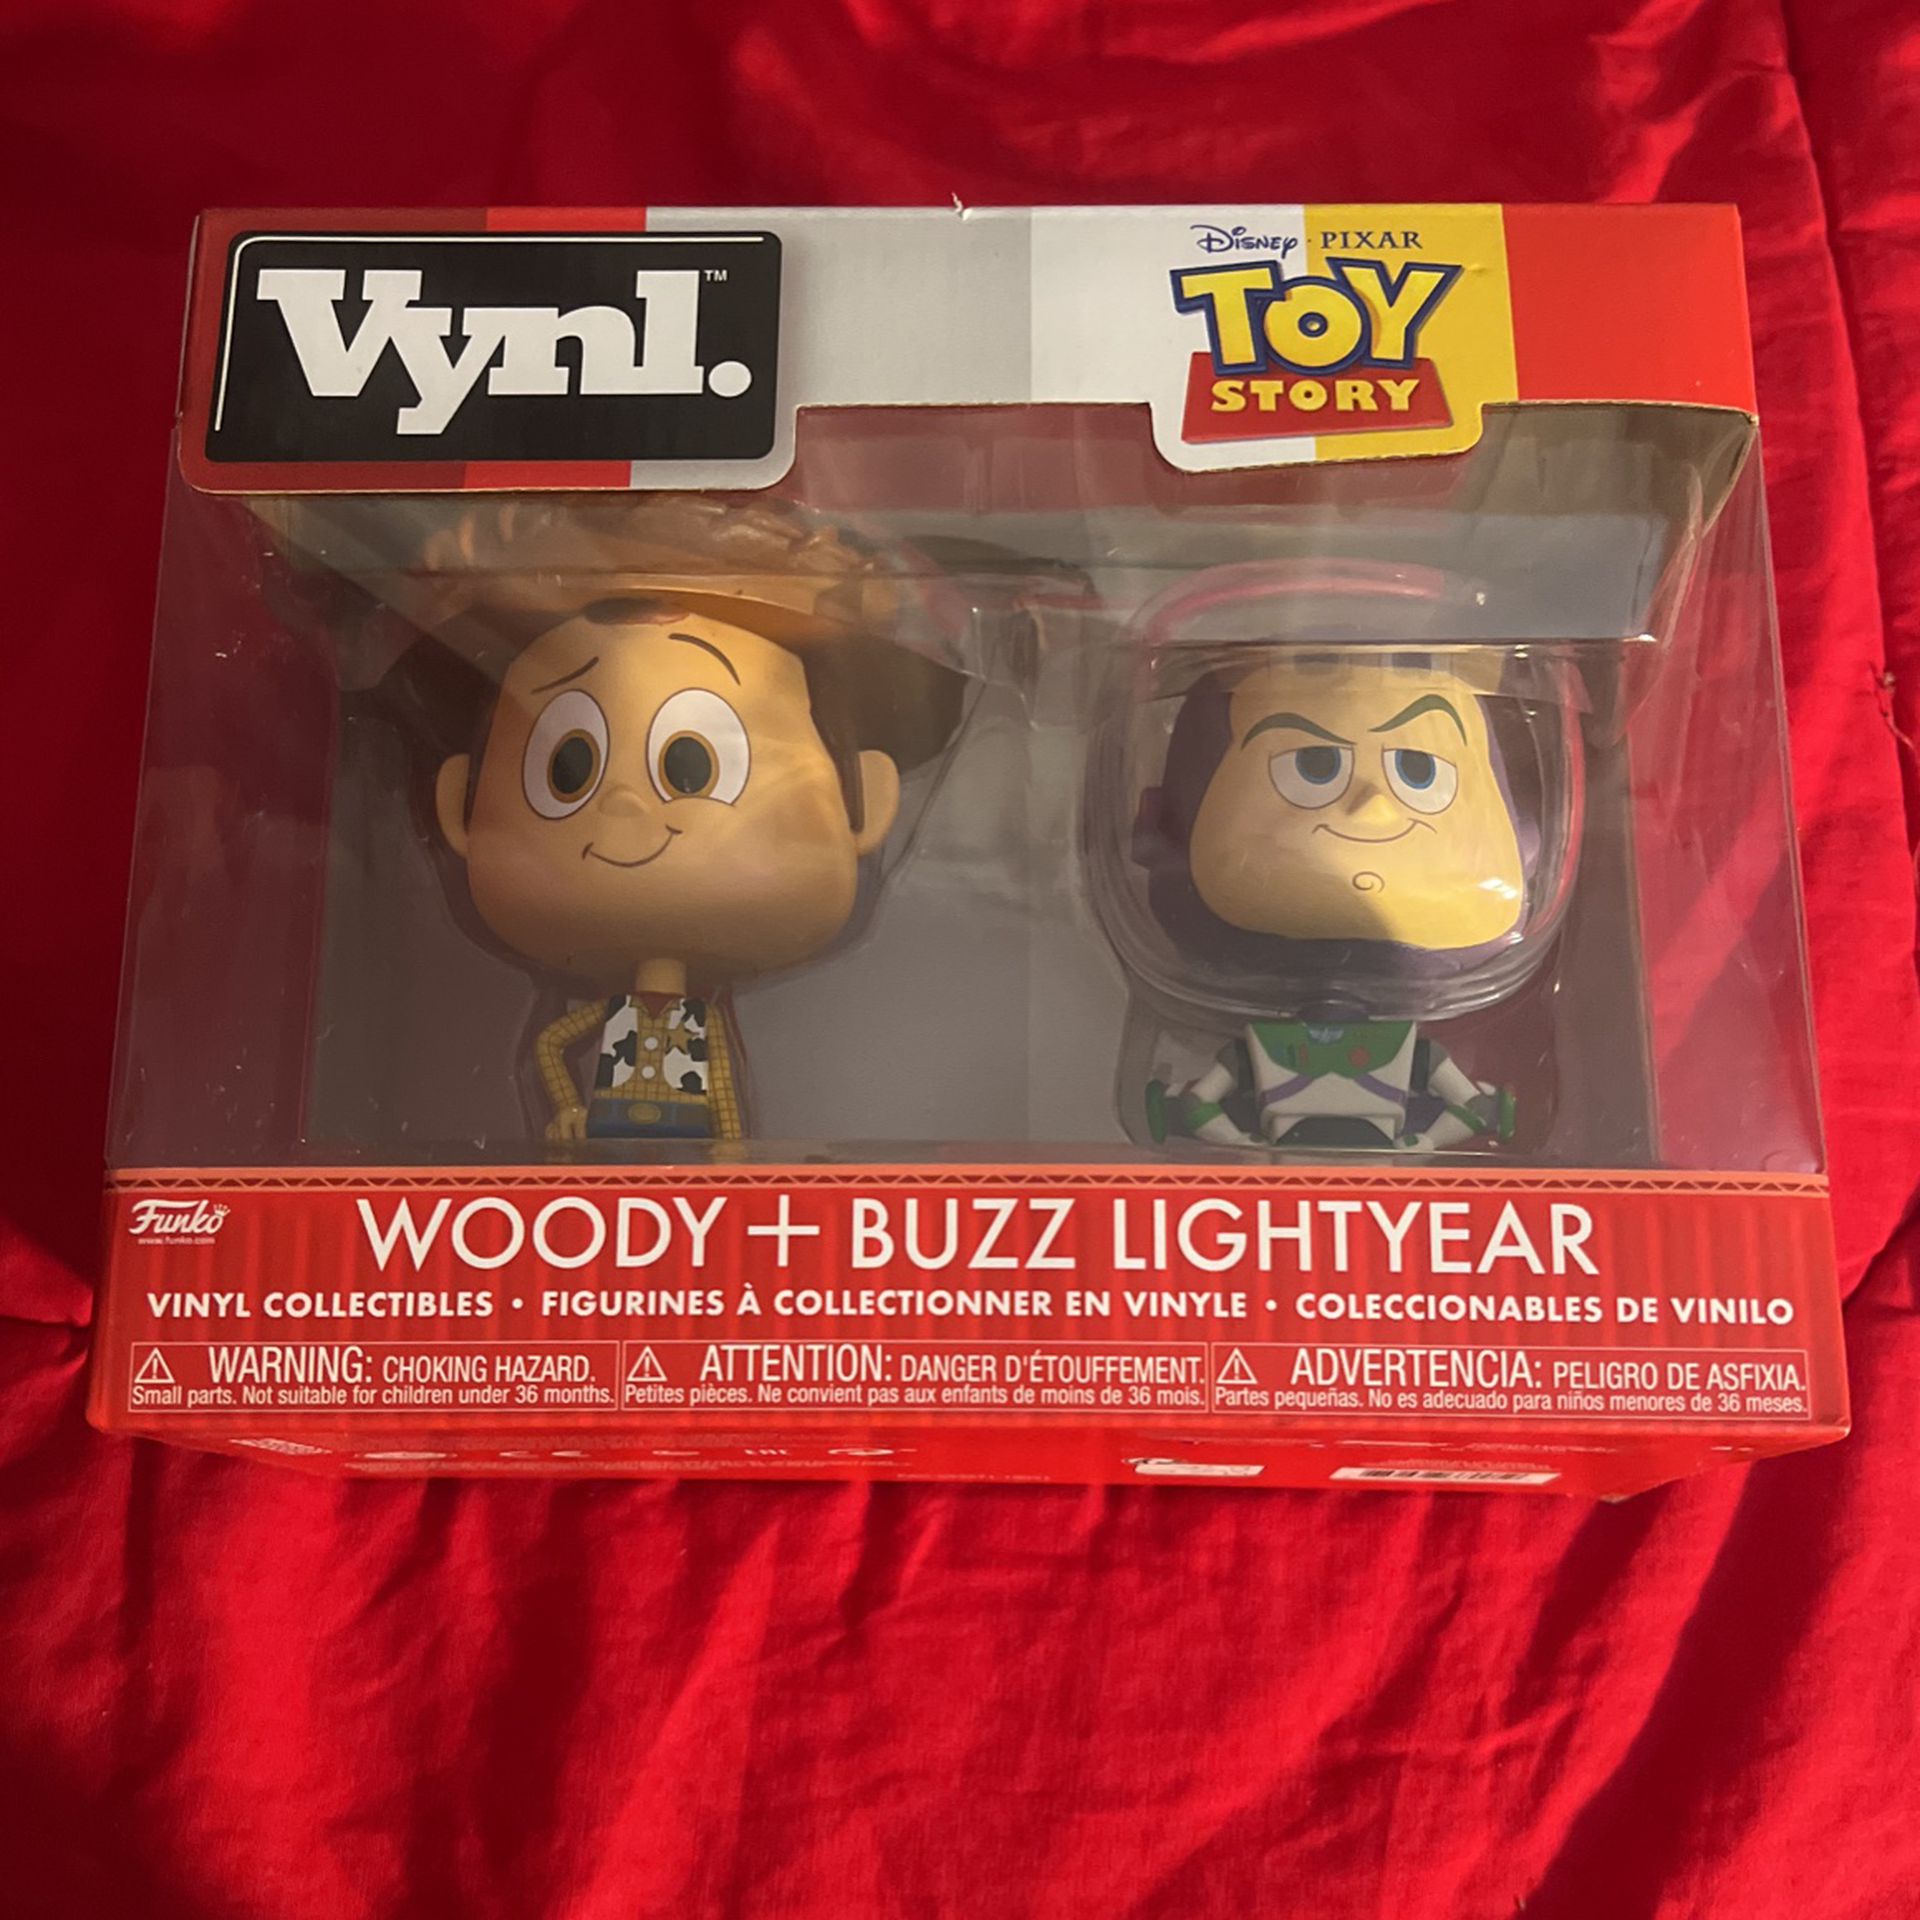 Funko Vynl. Woody + Buzz Lightyear Collectibles